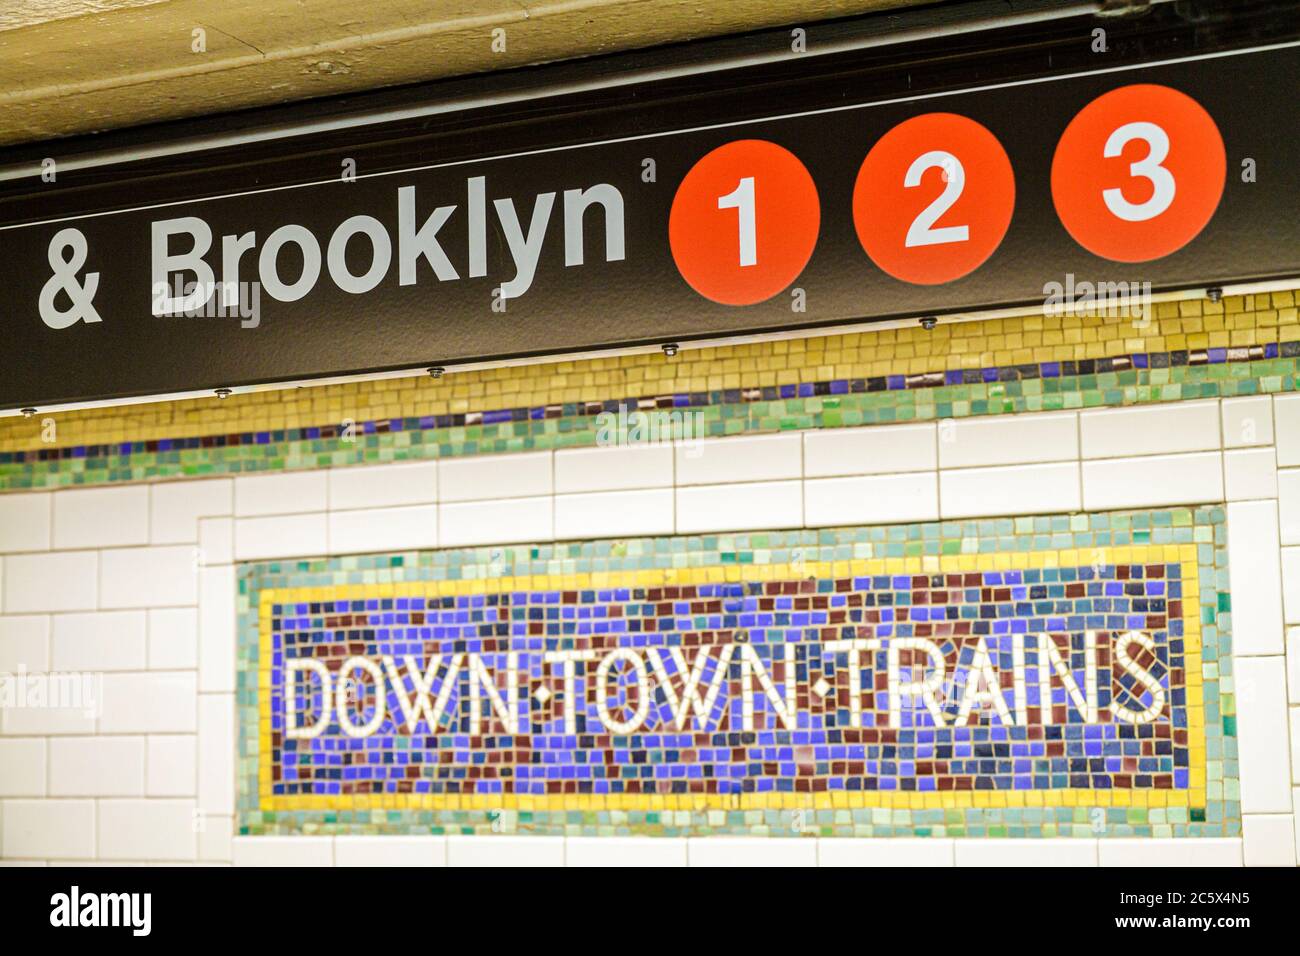 New York,New York City,NYC,Manhattan,Midtown,MTA New York Subway system,Times Square Station,1 2 3 highway Route,down town trains,Brooklyn,waiting pla Stock Photo